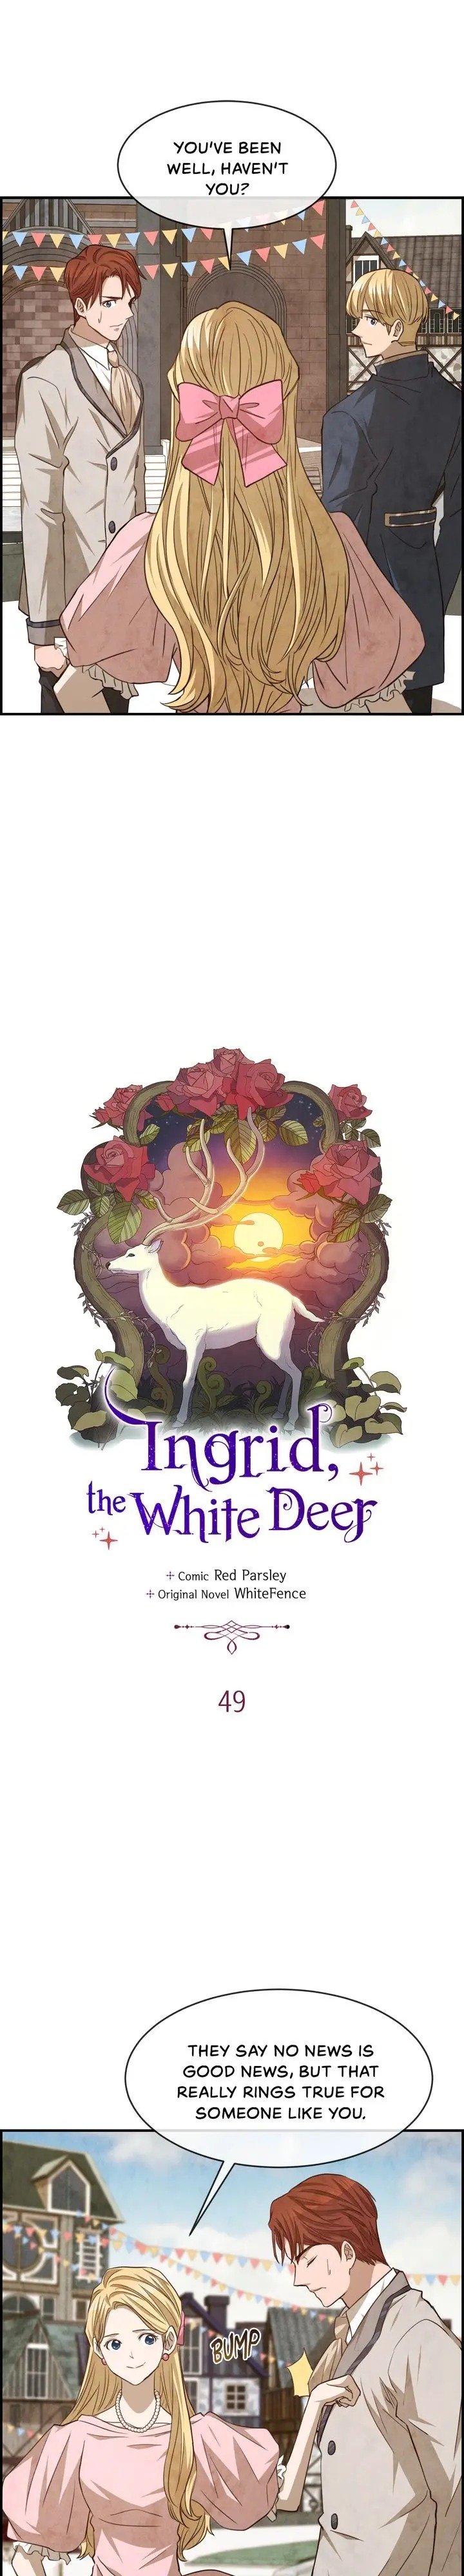 Ingrid, the White Deer Chapter 49 - Page 2